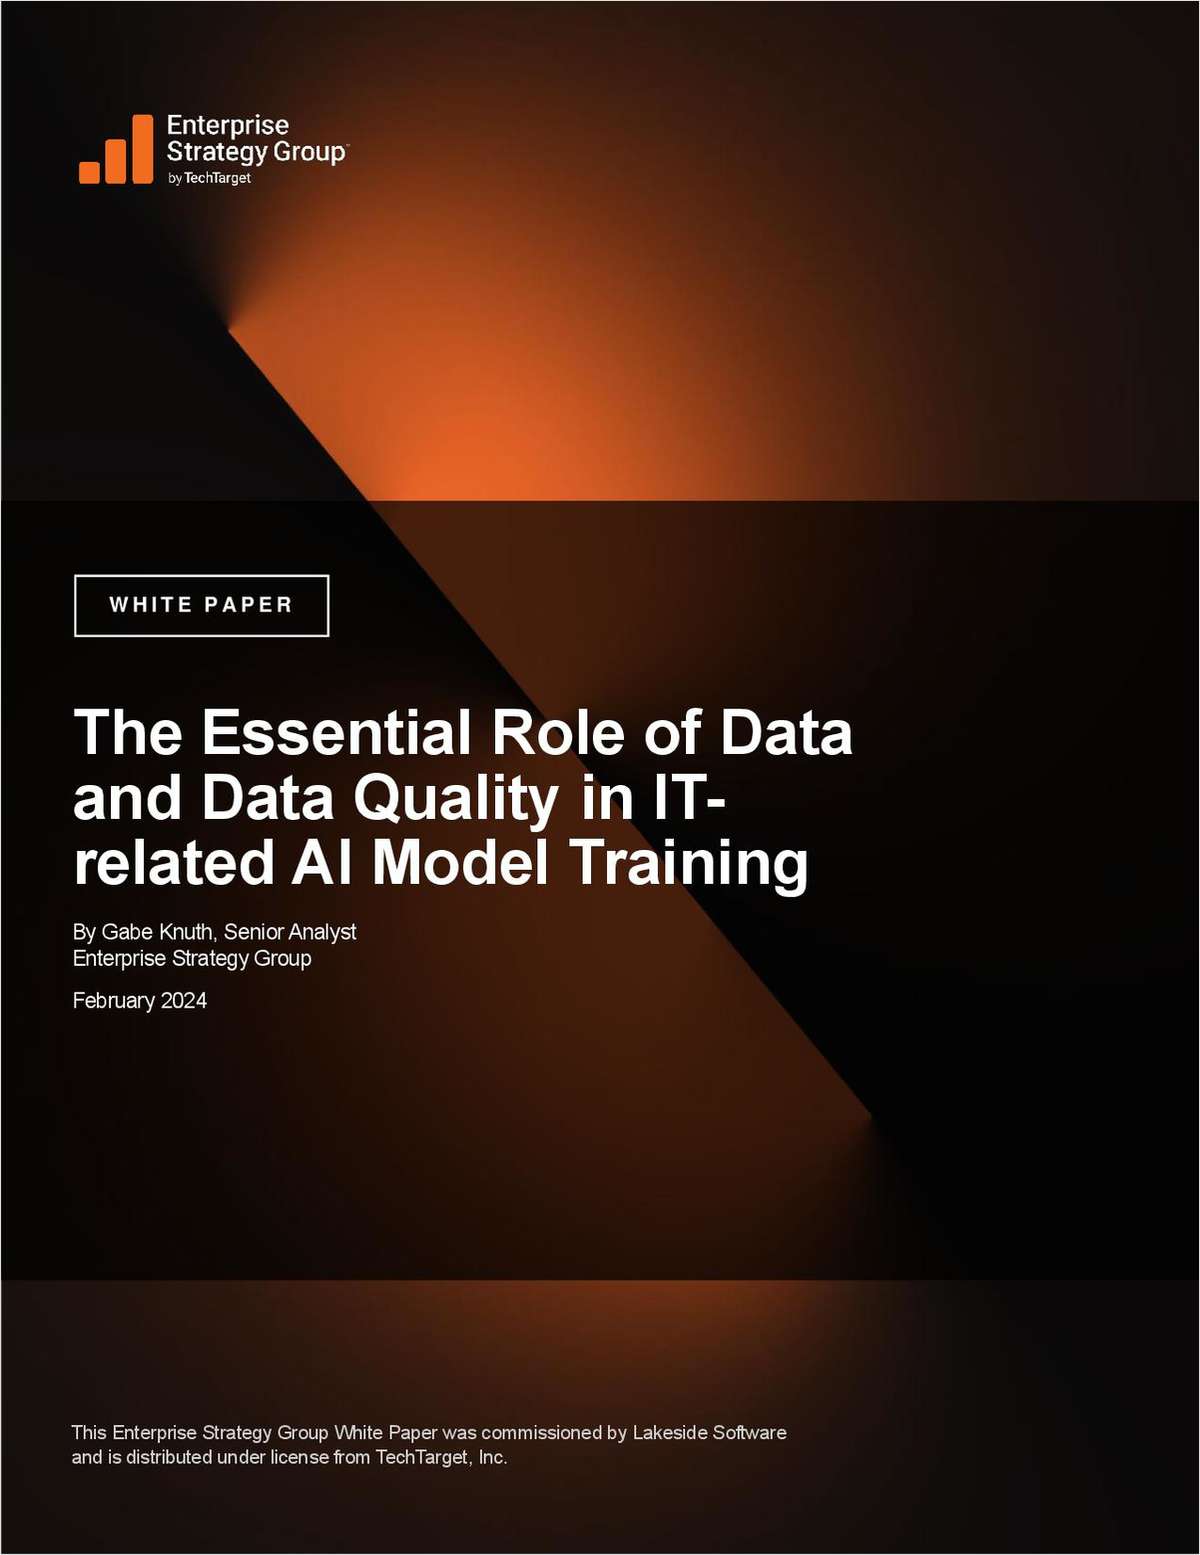 The Essential Role of Data and Data Quality in IT-related AI Model Training